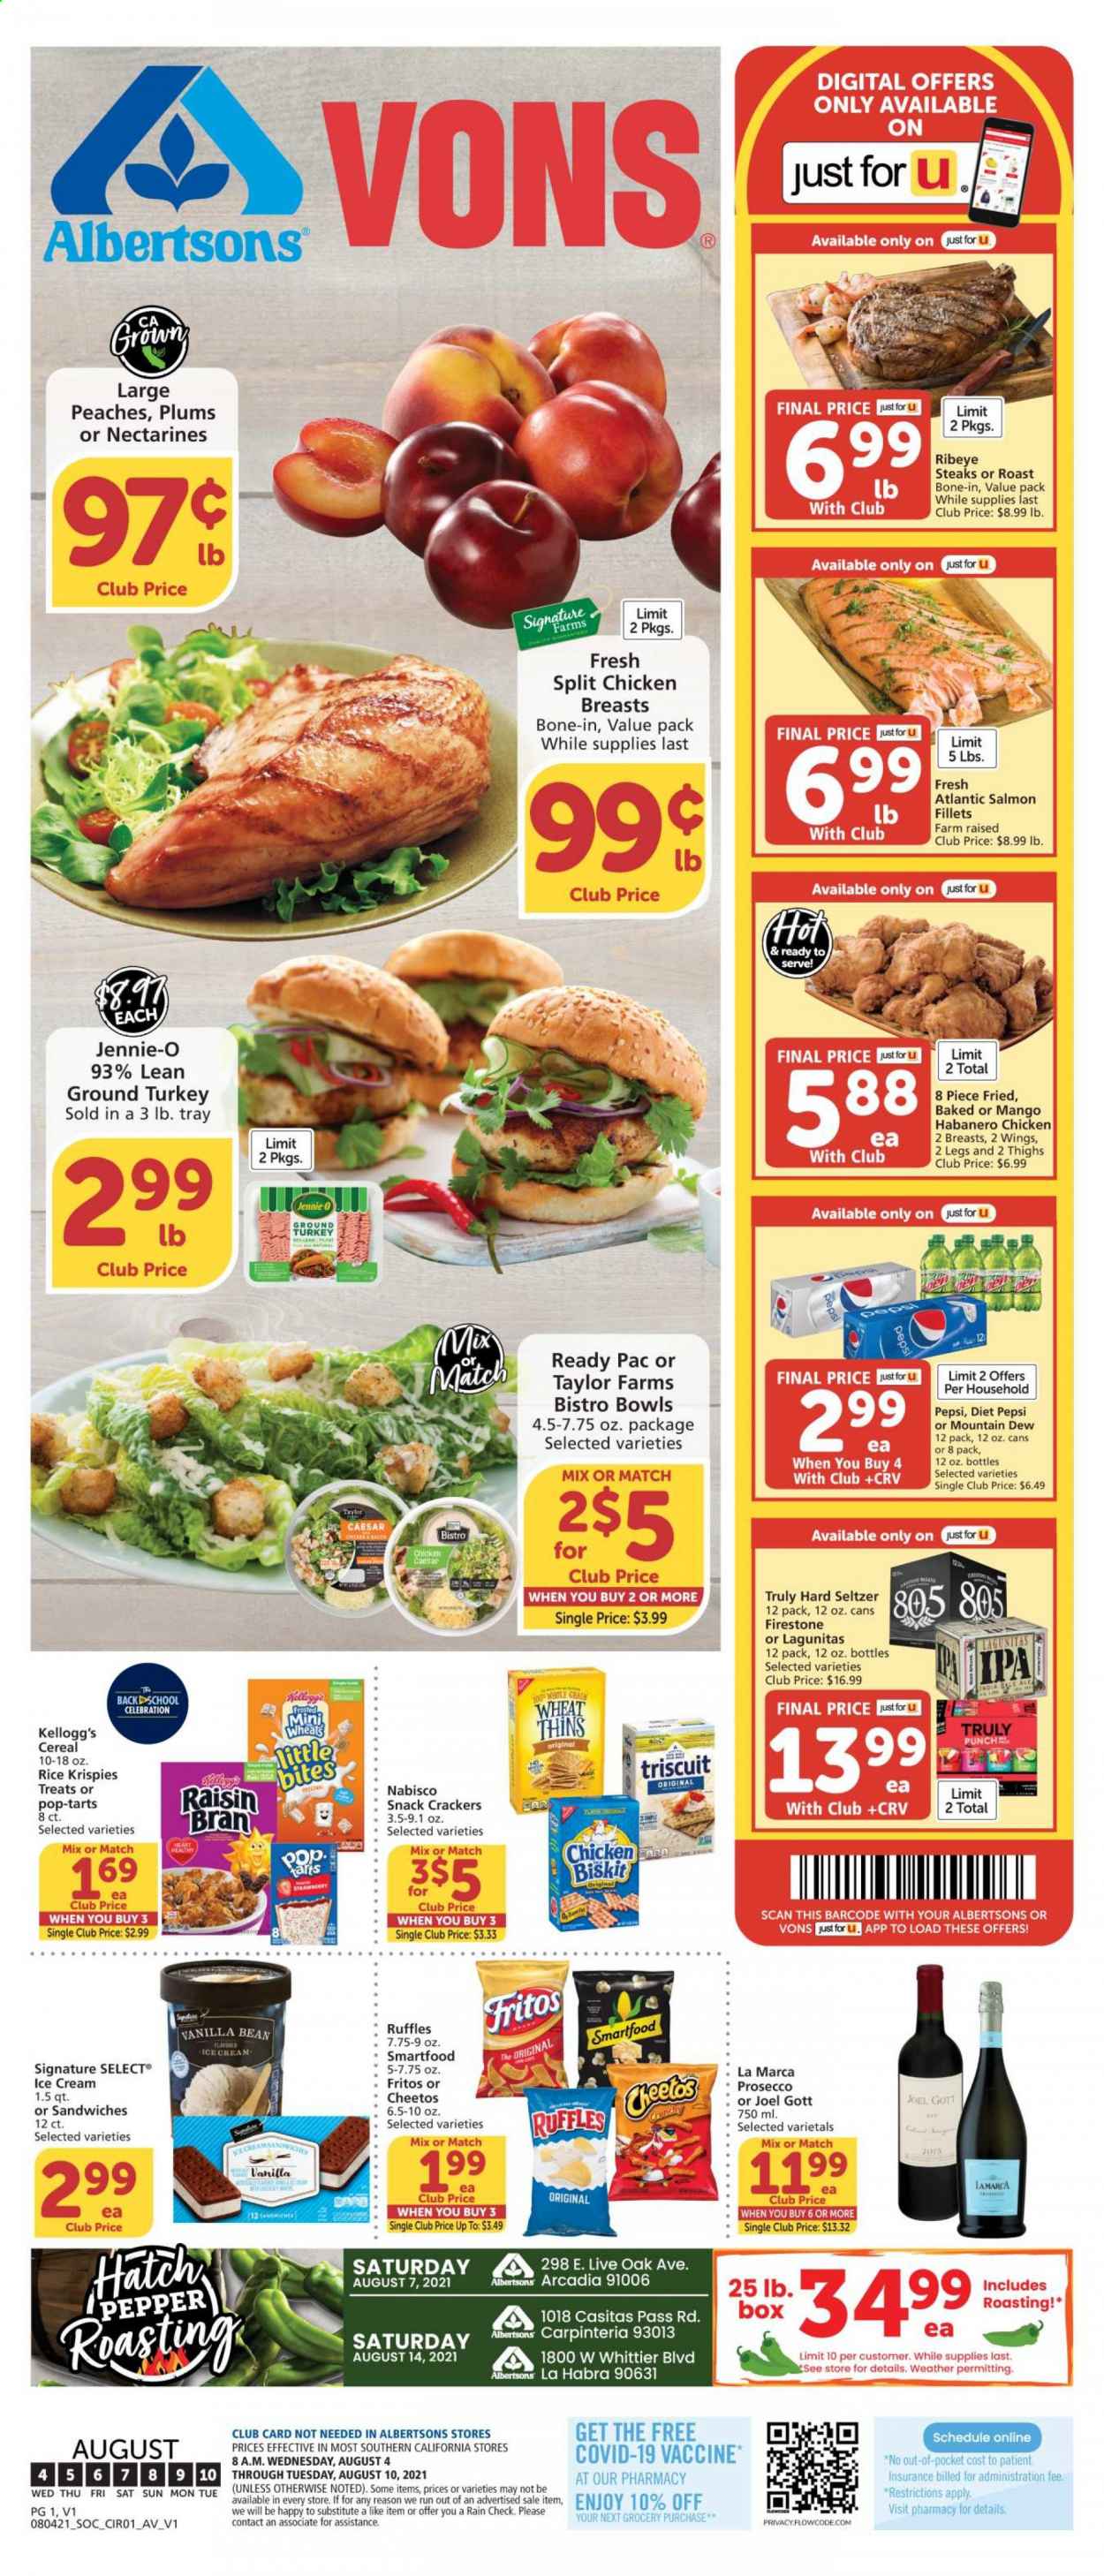 thumbnail - Vons Flyer - 08/04/2021 - 08/10/2021 - Sales products - plums, ground turkey, chicken breasts, beef meat, steak, ribeye steak, salmon, salmon fillet, sandwich, habanero chicken, Ready Pac, ice cream, snack, Celebration, crackers, Kellogg's, Pop-Tarts, Fritos, Cheetos, Smartfood, Thins, Ruffles, cereals, Rice Krispies, Mountain Dew, Pepsi, Diet Pepsi, prosecco, punch, Hard Seltzer, TRULY, IPA, nectarines, peaches. Page 1.